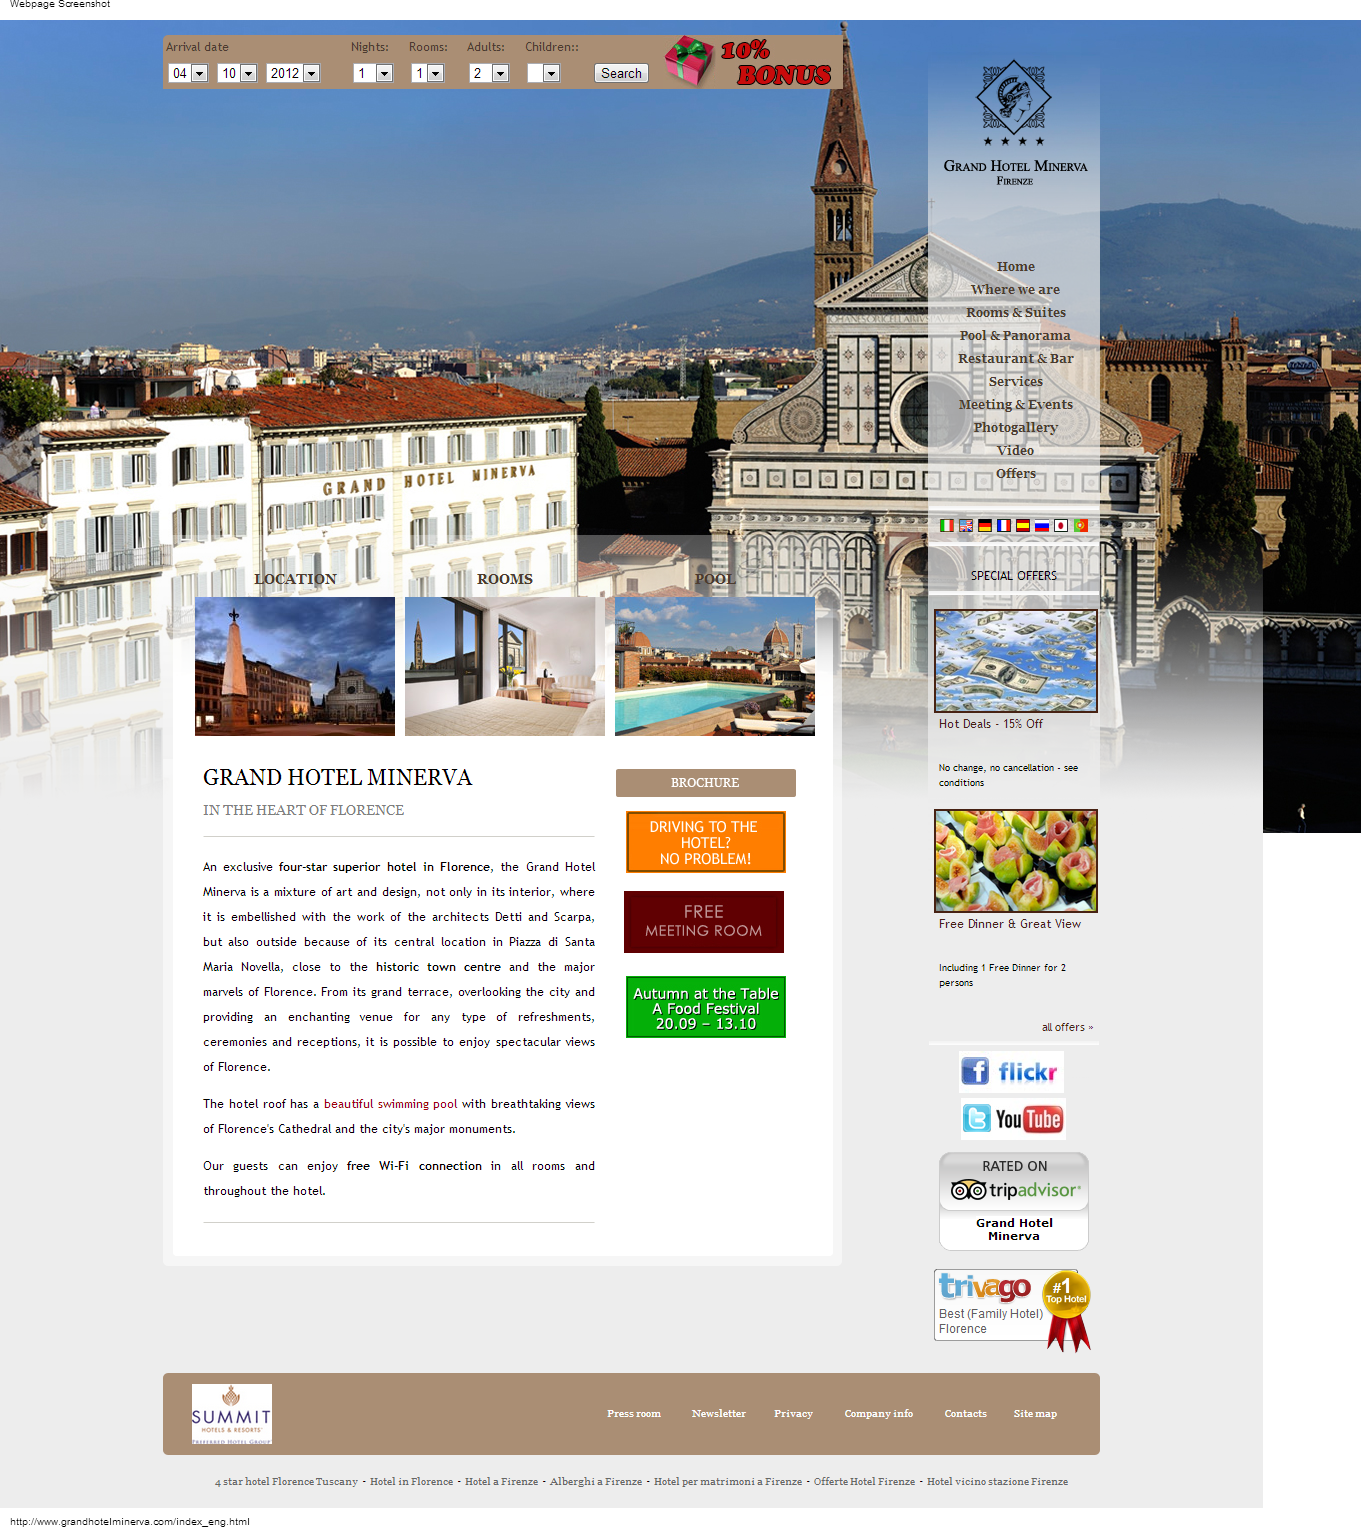 Details : Grand Hotel Minerva: 4-star hotel in Florence historical center -  Tuscany (Italy)